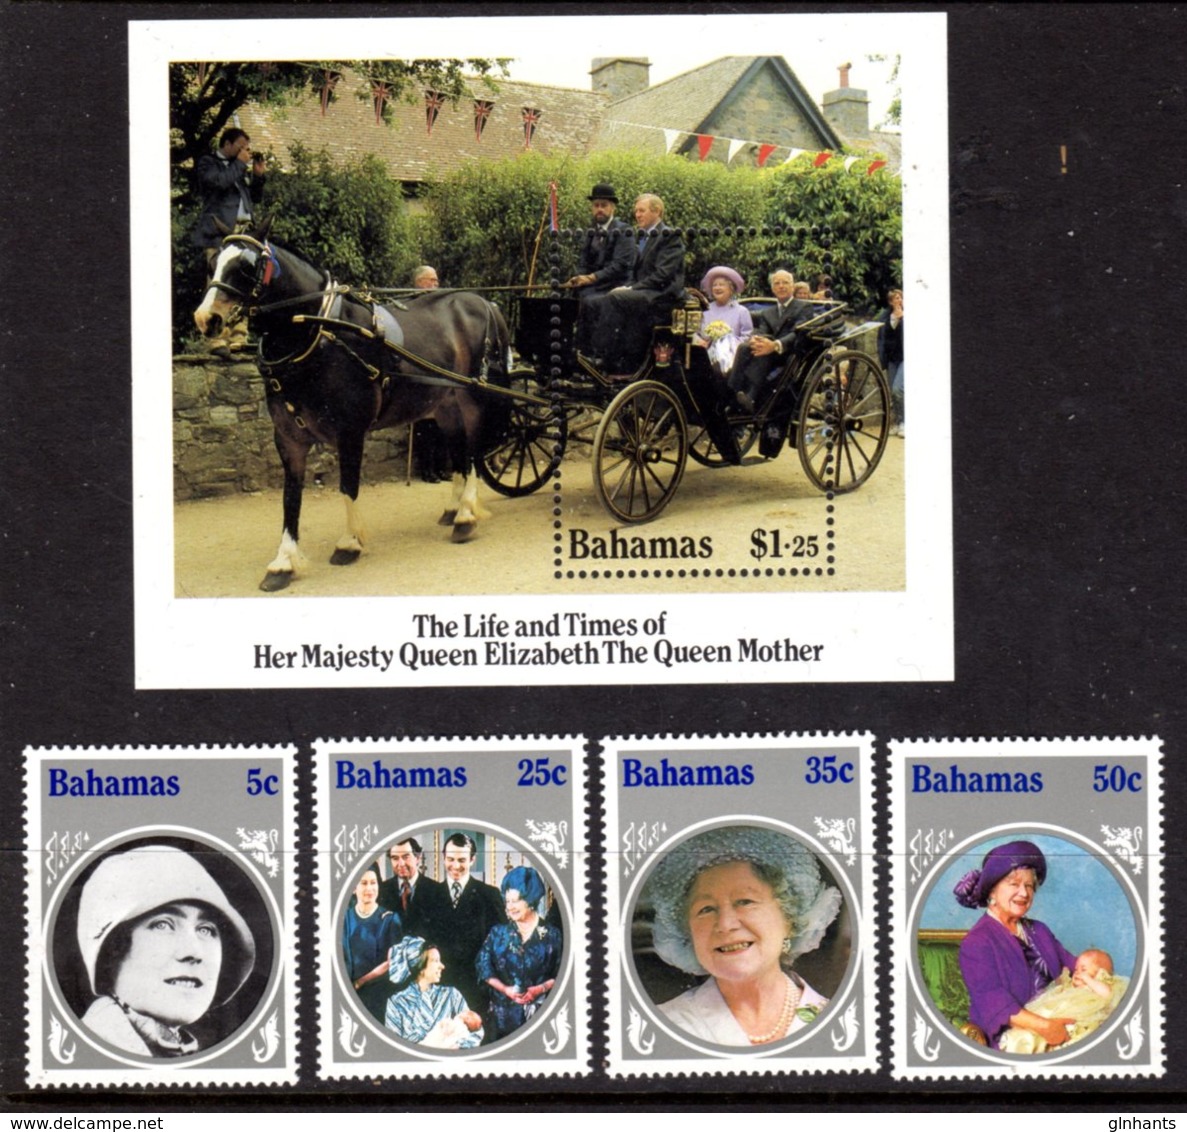 BAHAMAS - 1985 LIFE & TIMES OF QUEEN ELIZABETH THE QUEEN MOTHER SET (4V) & MS FINE MNH ** SG 712-715, MS716 - Bahamas (1973-...)